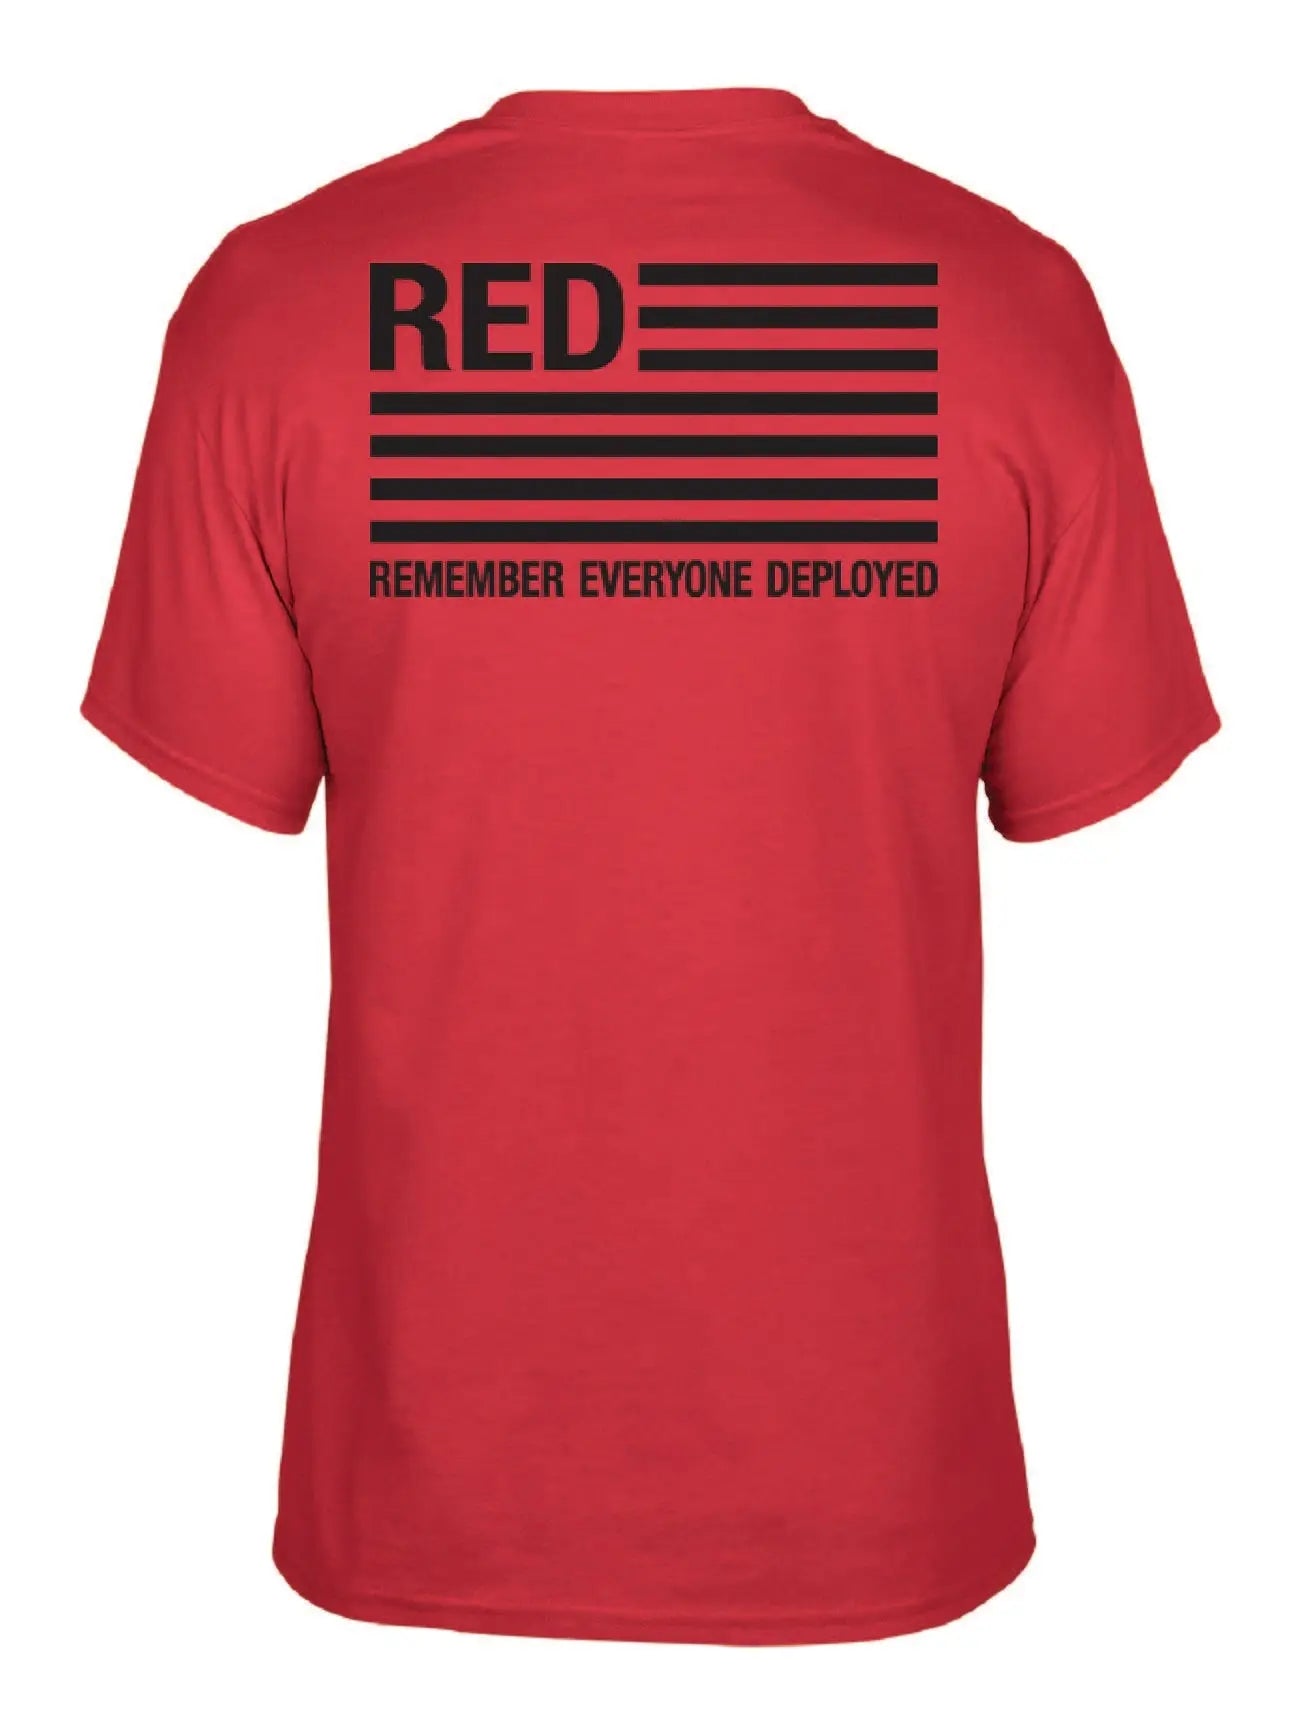 RED - Remember Everyone Deployed Tee Left Coast Lifestyle